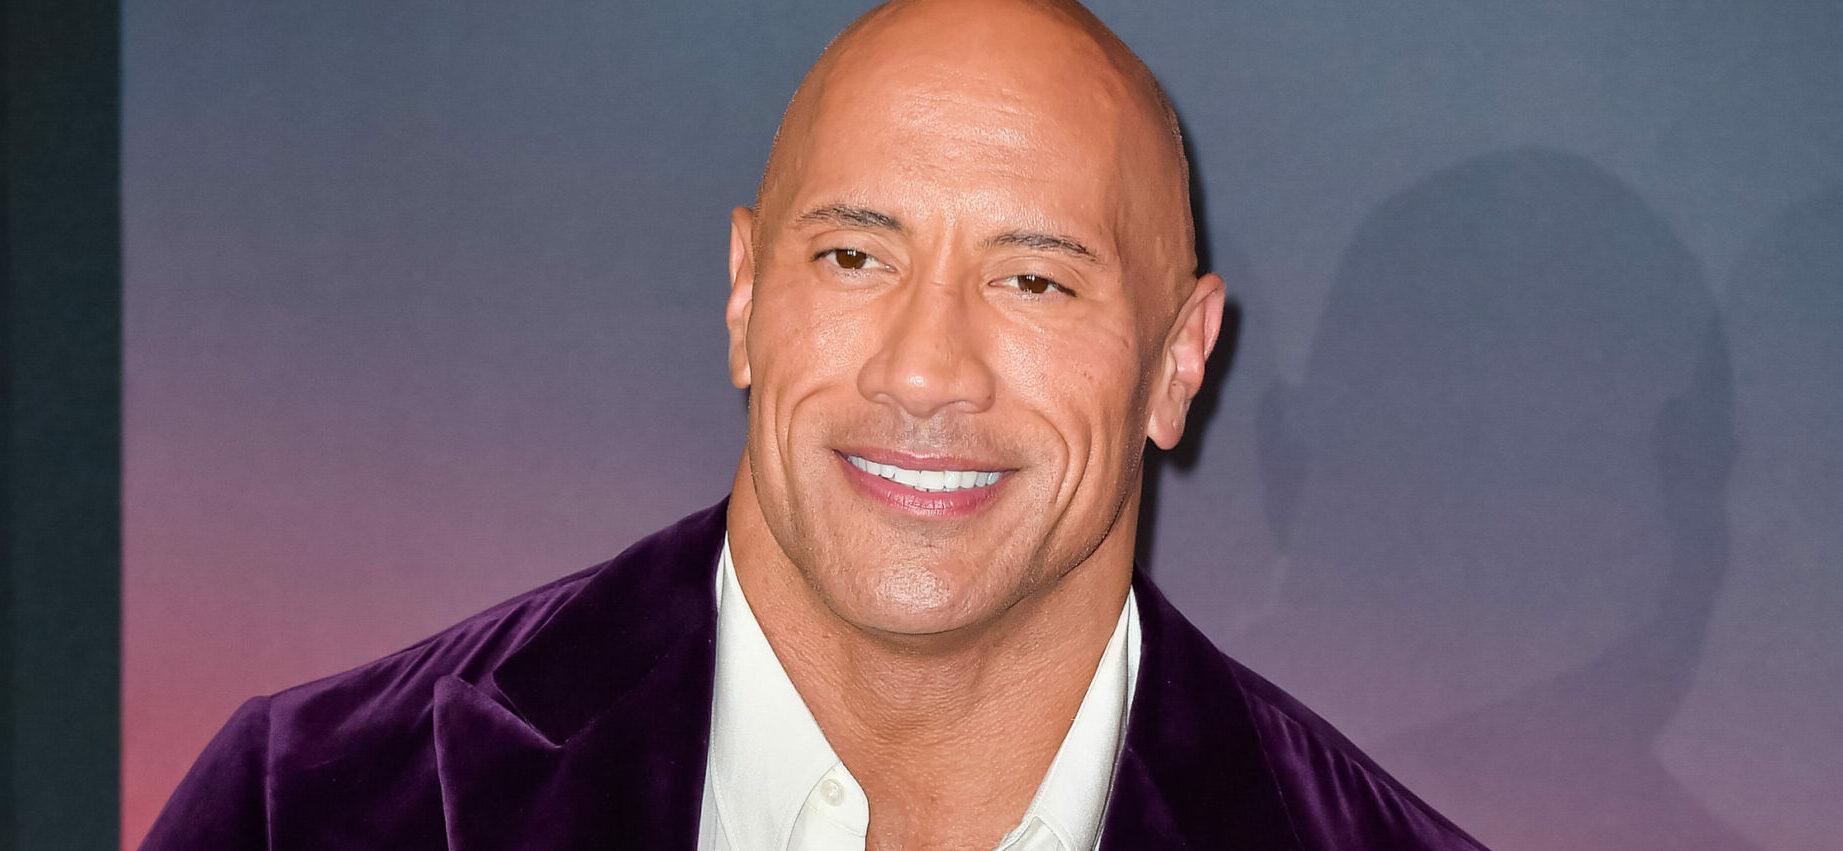 Dwayne Johnson gets smashed by daughters